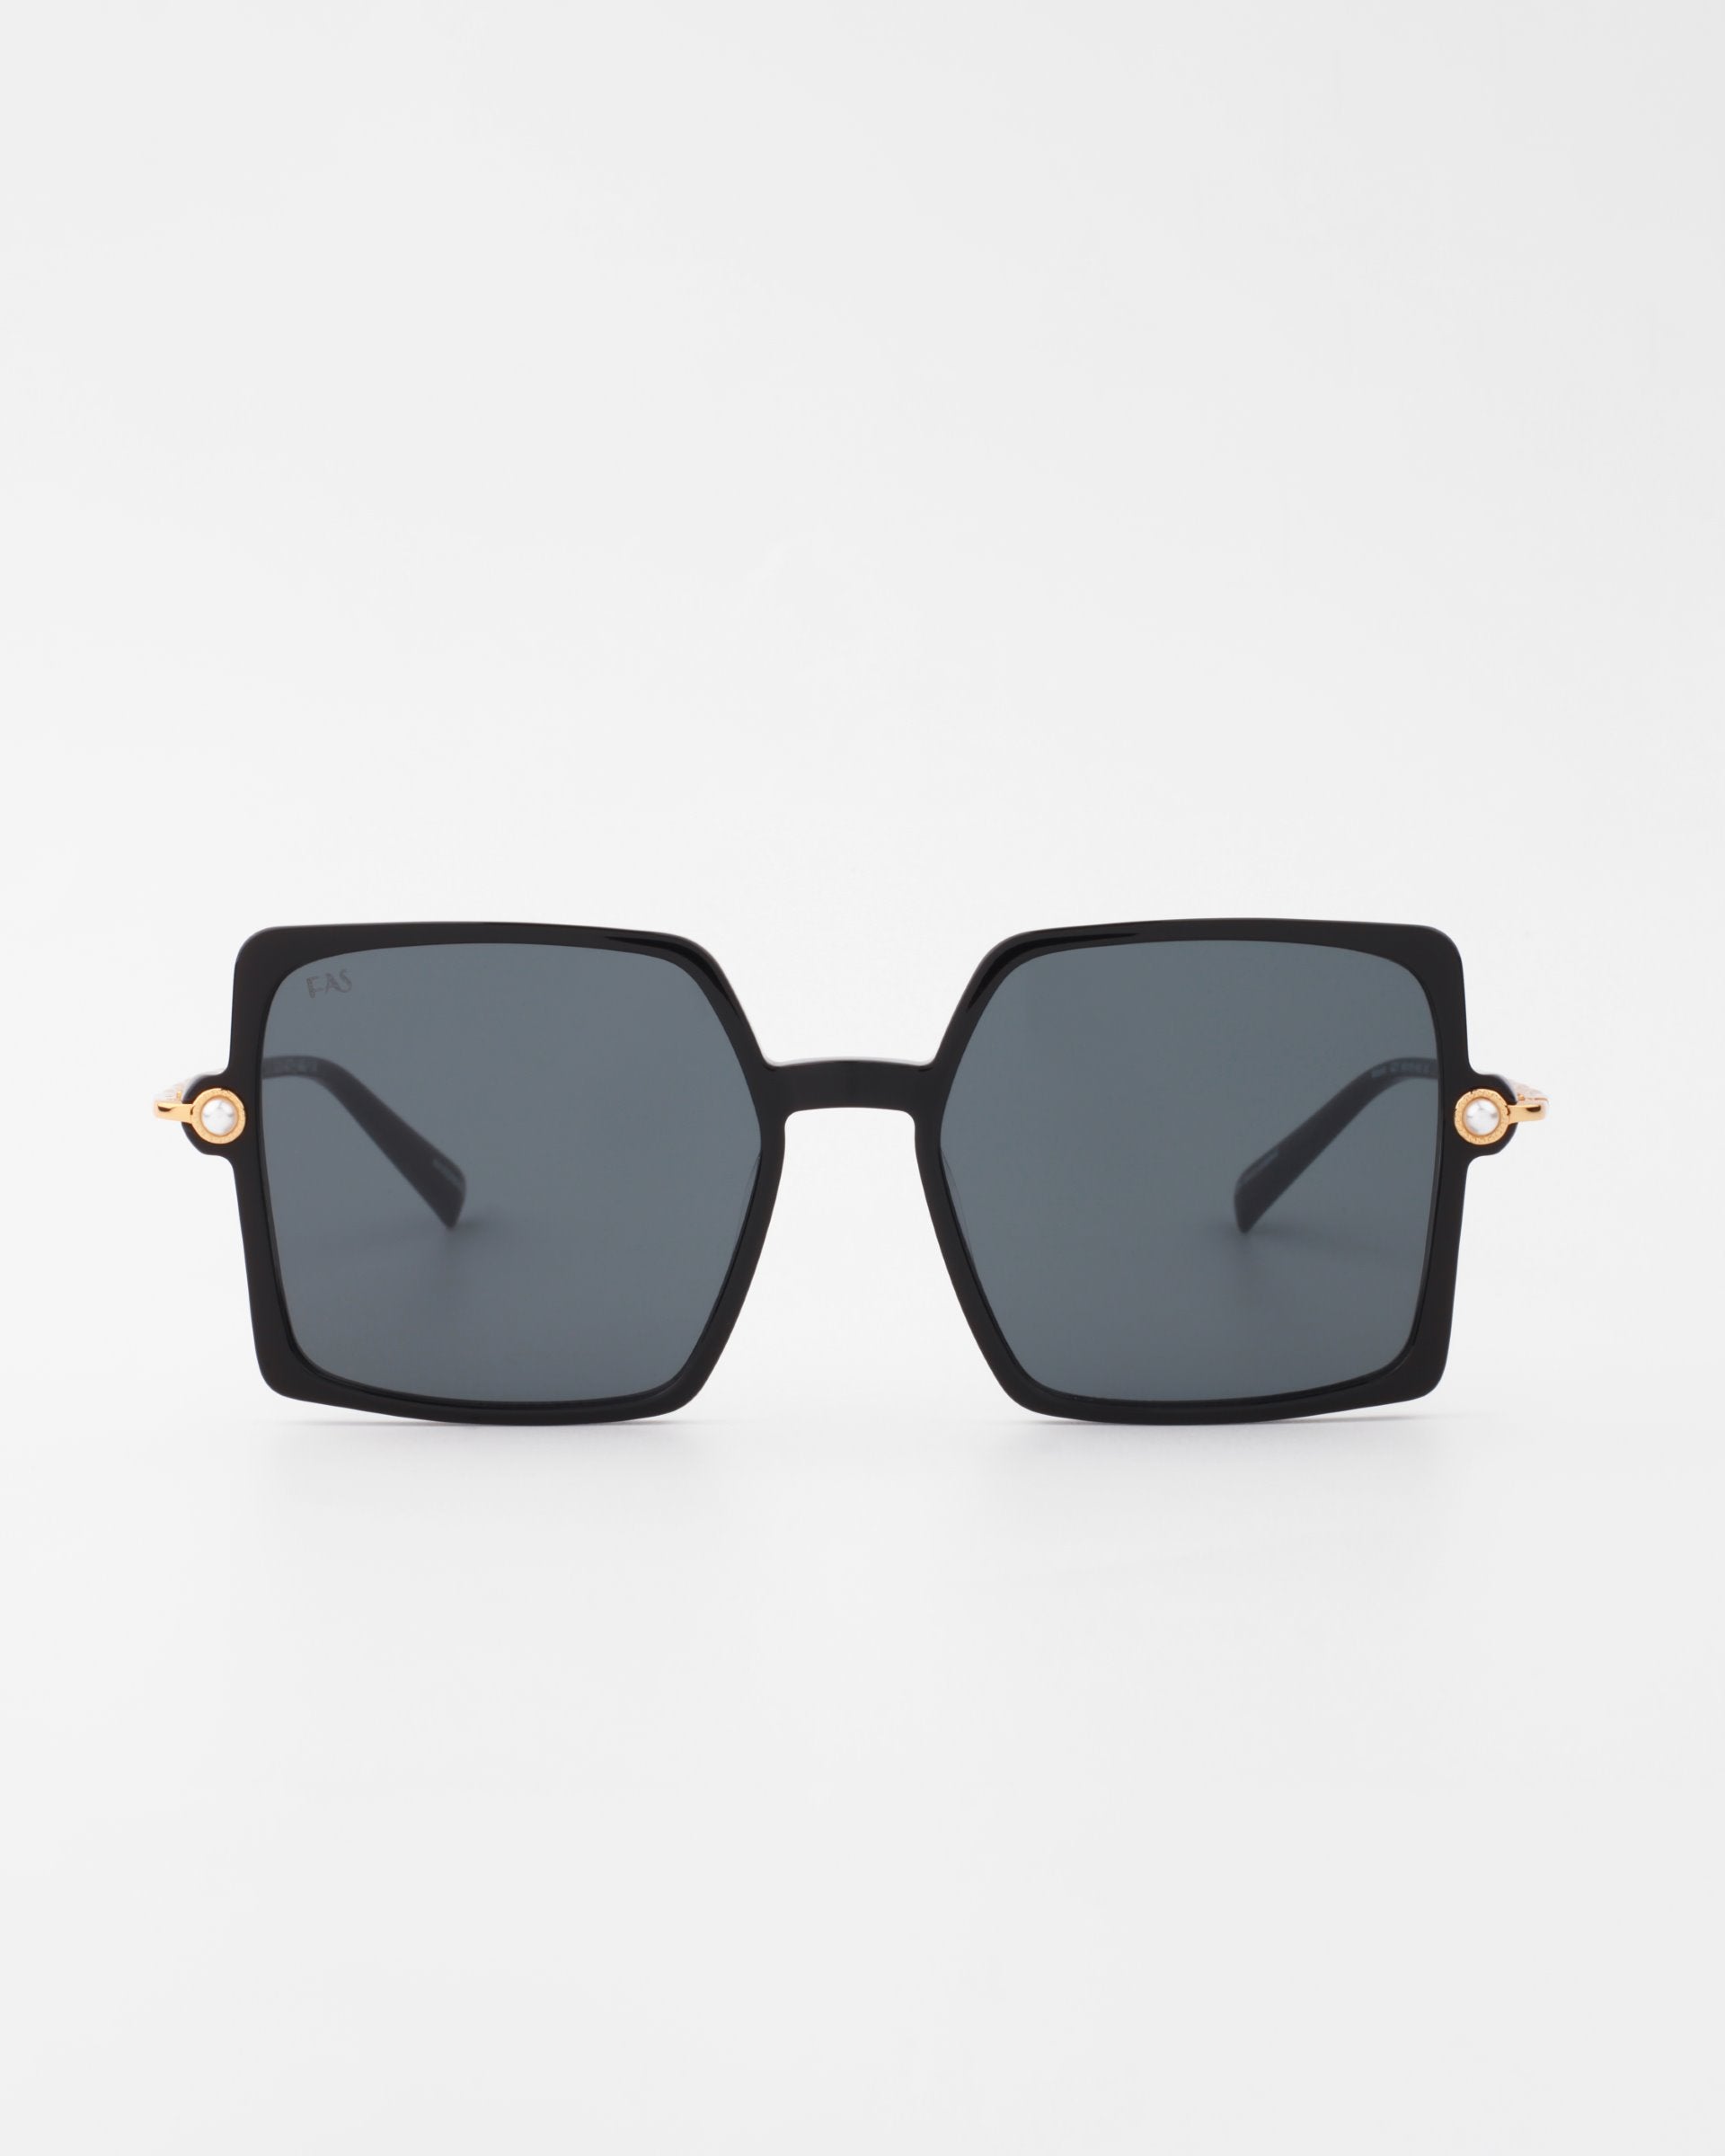 A pair of large, square-shaped sunglasses with black frames and dark lenses. The temples are sleek, featuring 18-karat gold-plated arms and a small gold accent on the hinges. Handmade acetate Moxie by For Art&#39;s Sake® offering UVA &amp; UVB protection, the overall design is modern and stylish against a plain white background.